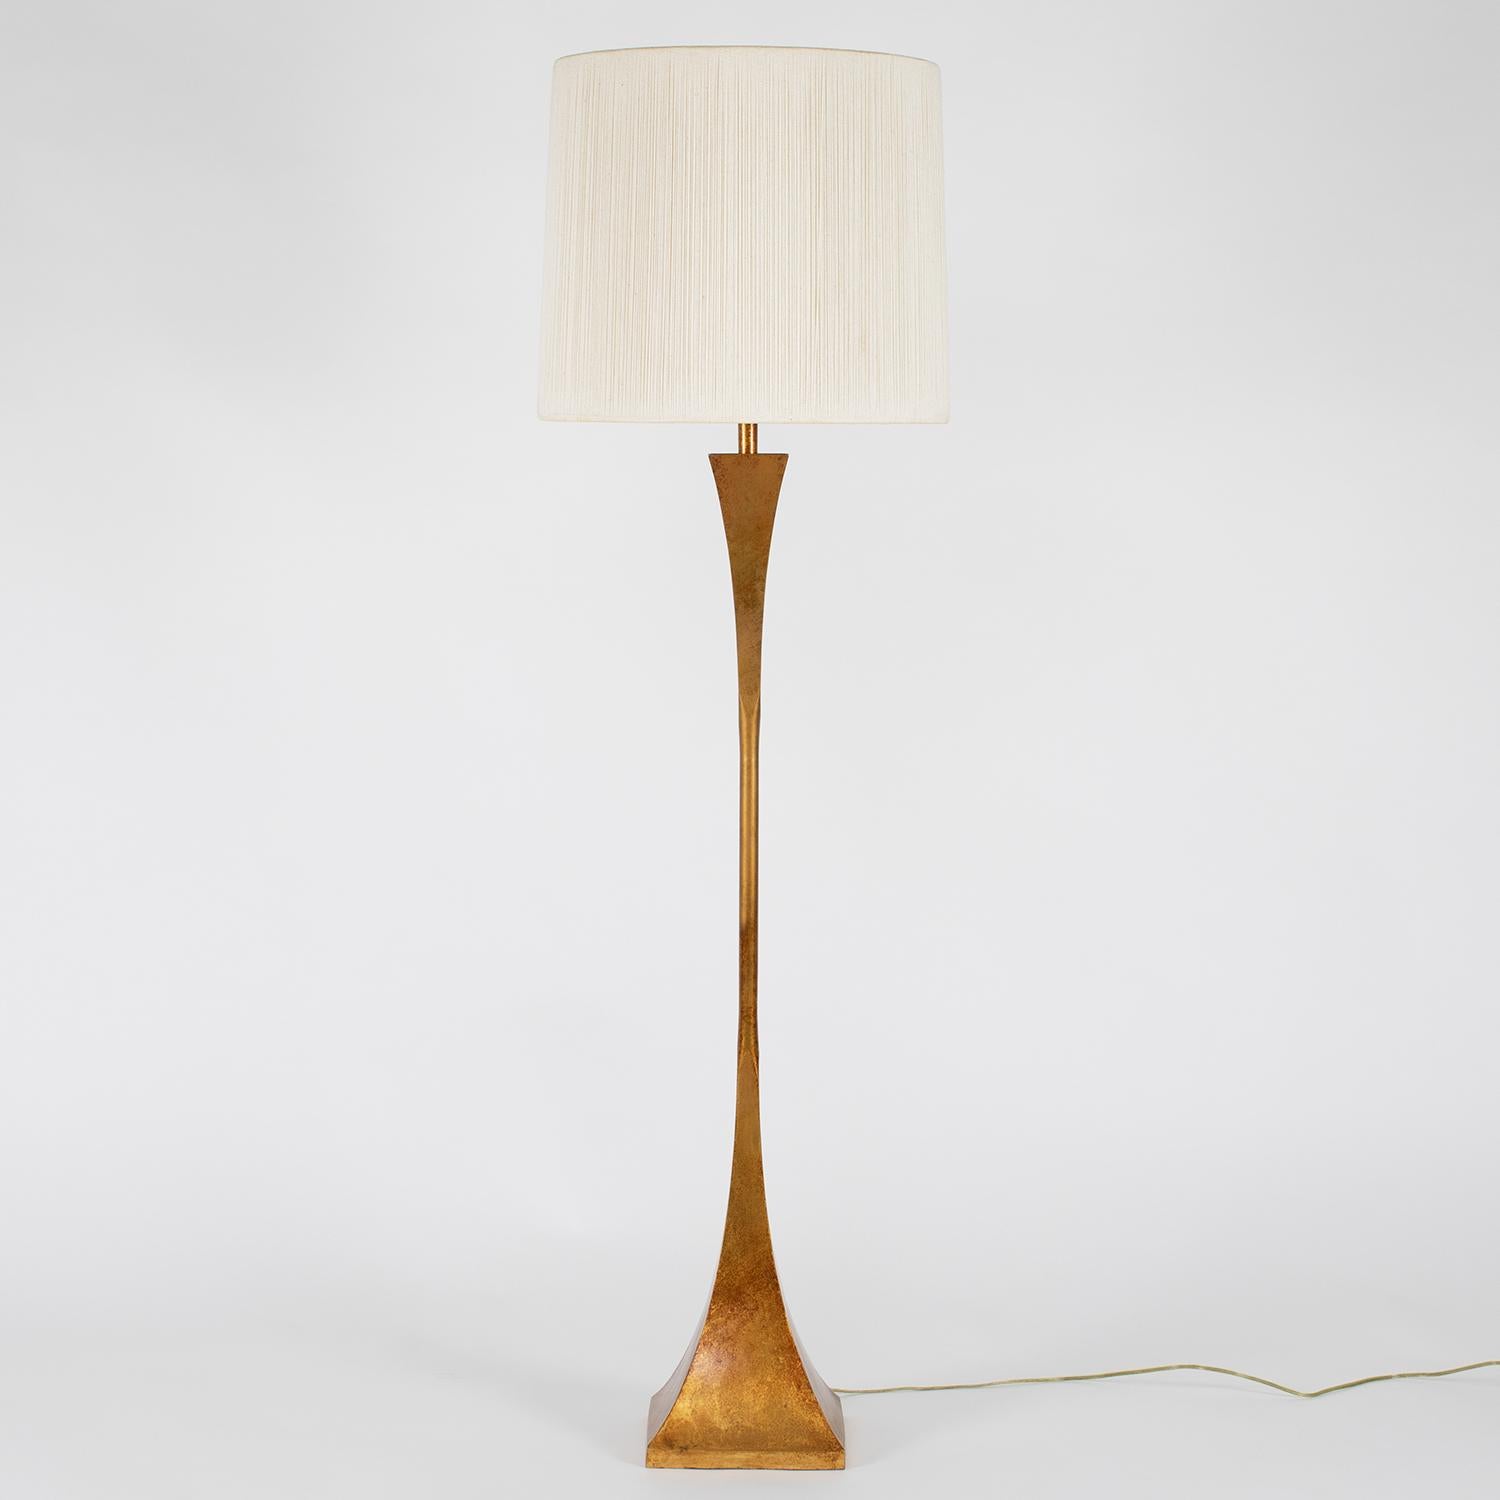 Sculptural floor lamp in gilded bronze with rotating switch at top by Stuart Ross James for Hansen, American, 1960s.

Measures: Shade diameter 16 inches.